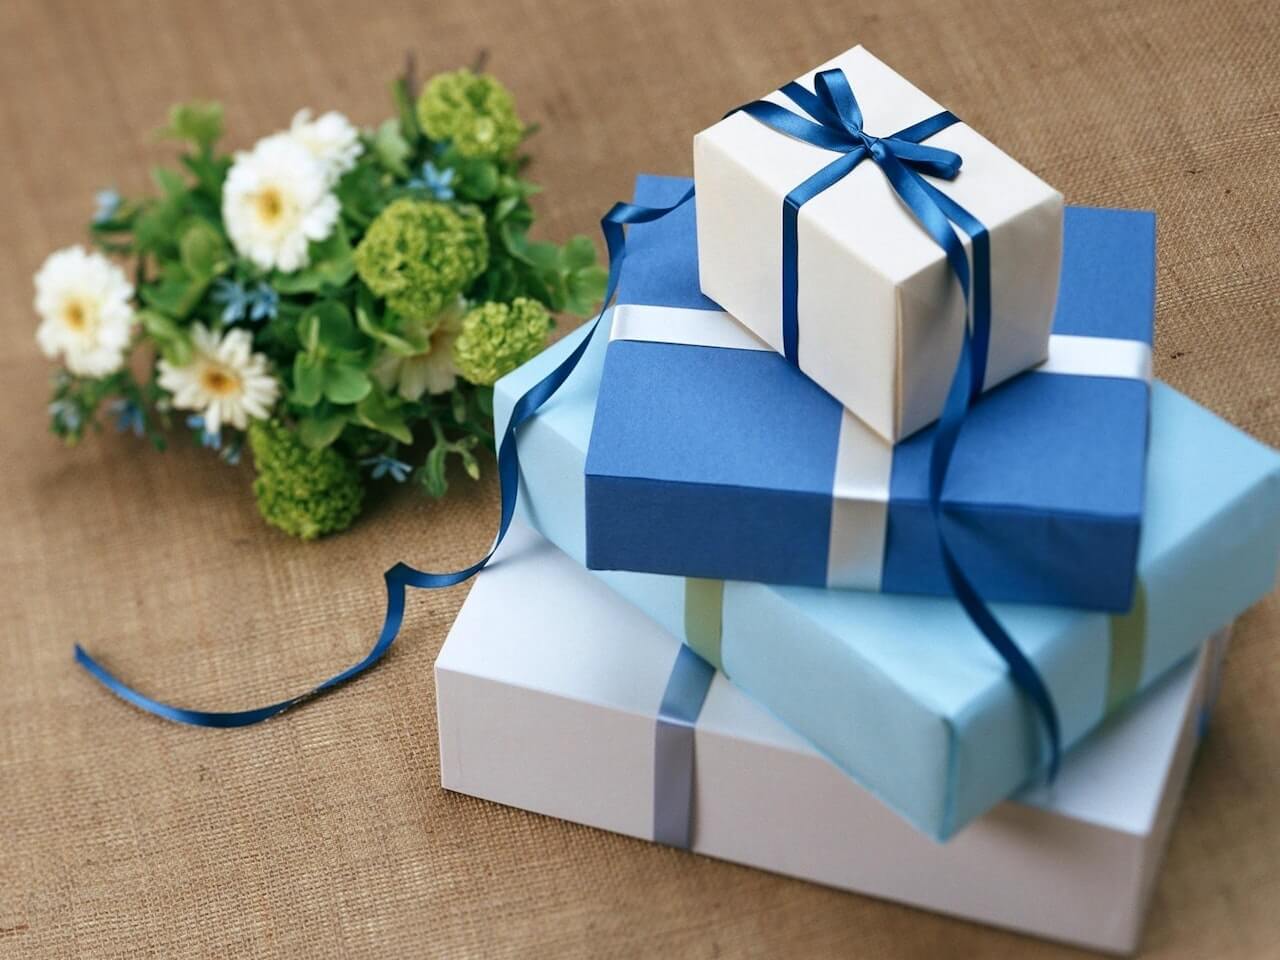 Master the Art of Gift Shopping: Save Money with Discount Codes